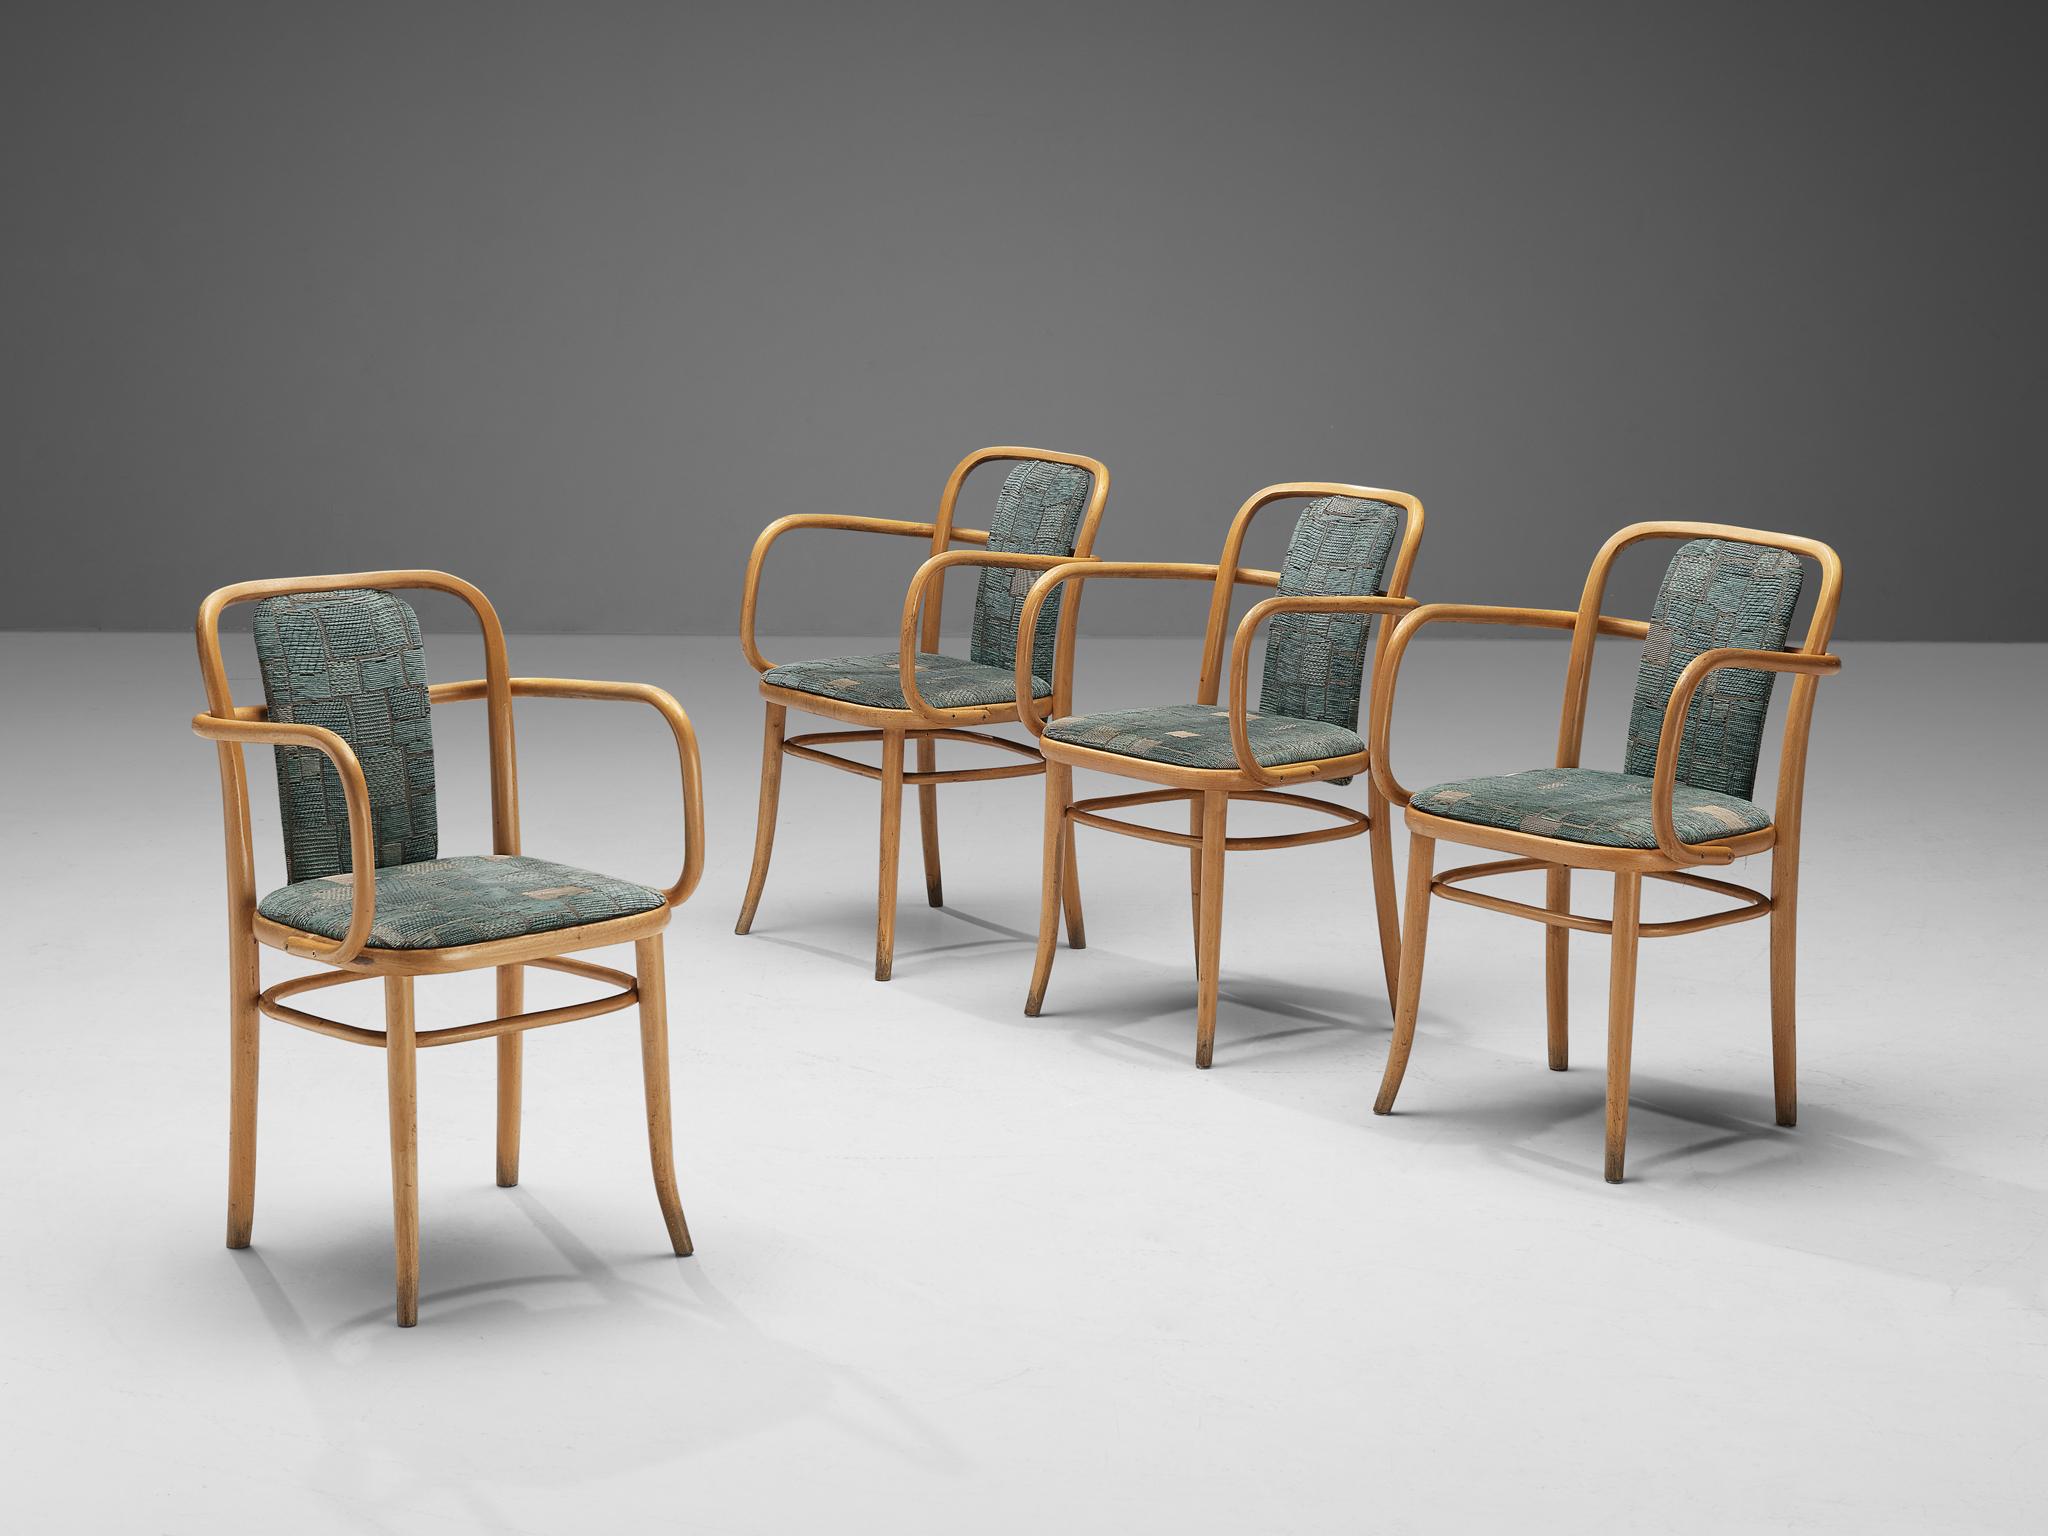 Dining chairs, bentwood and textured aquamarine upholstery, Europe, 1960s.
 
Set of four elegant armchairs in bentwood. The bentwood armrests have sinuous lines, flowing across the open backrests. With the upholstered backrest and seating the chairs